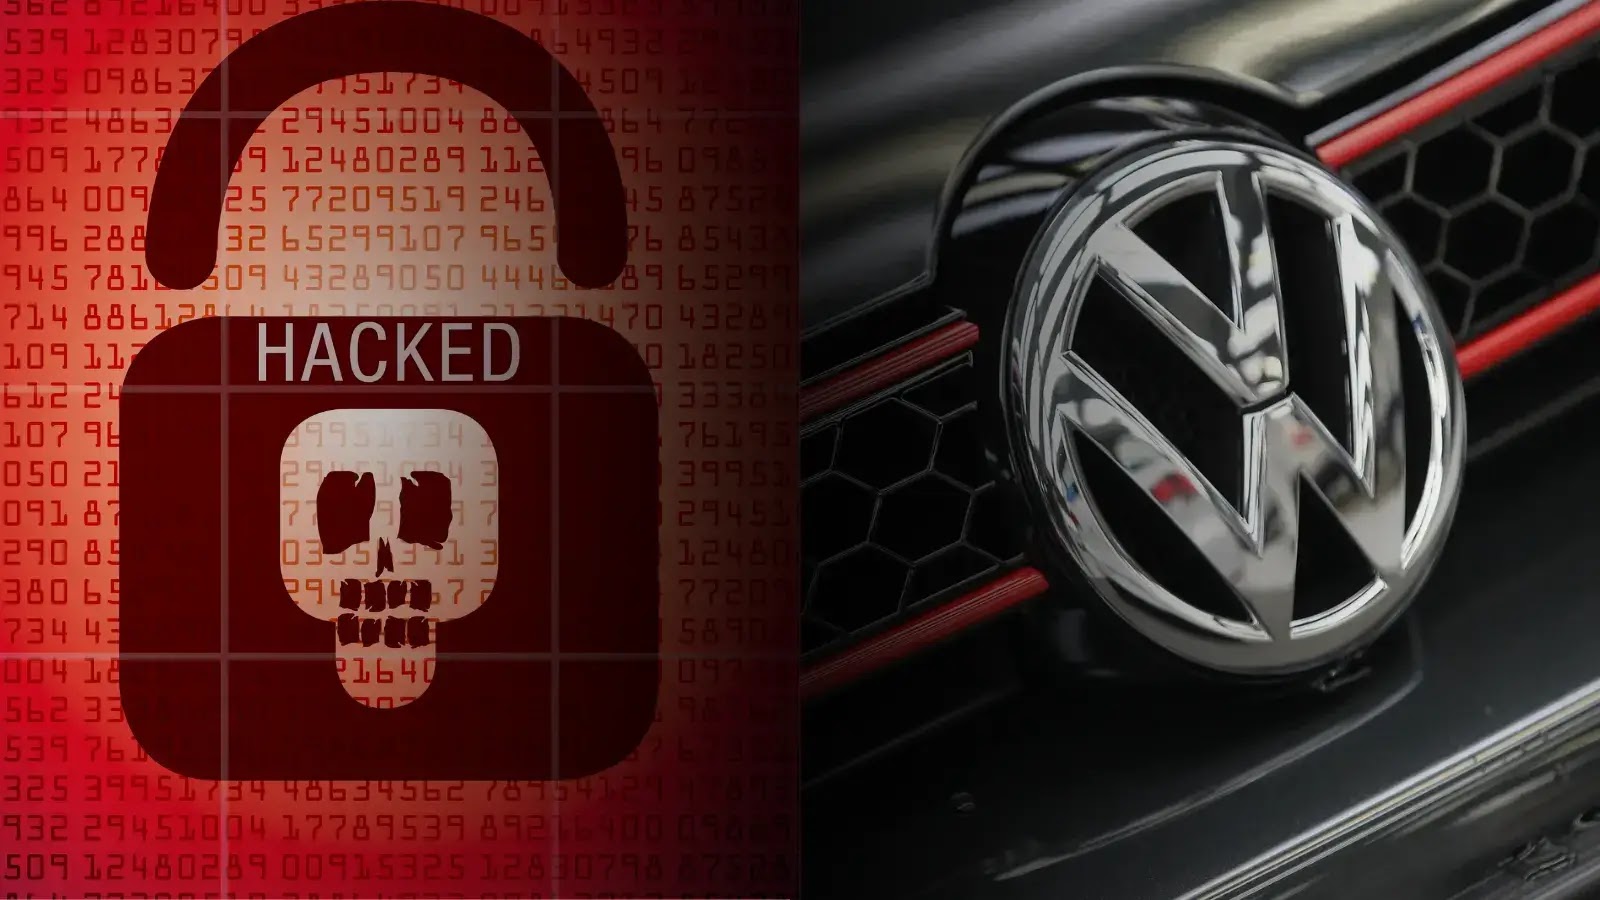 Volkswagen Group’s Systems Hacked: 19,000+ Documents Stolen